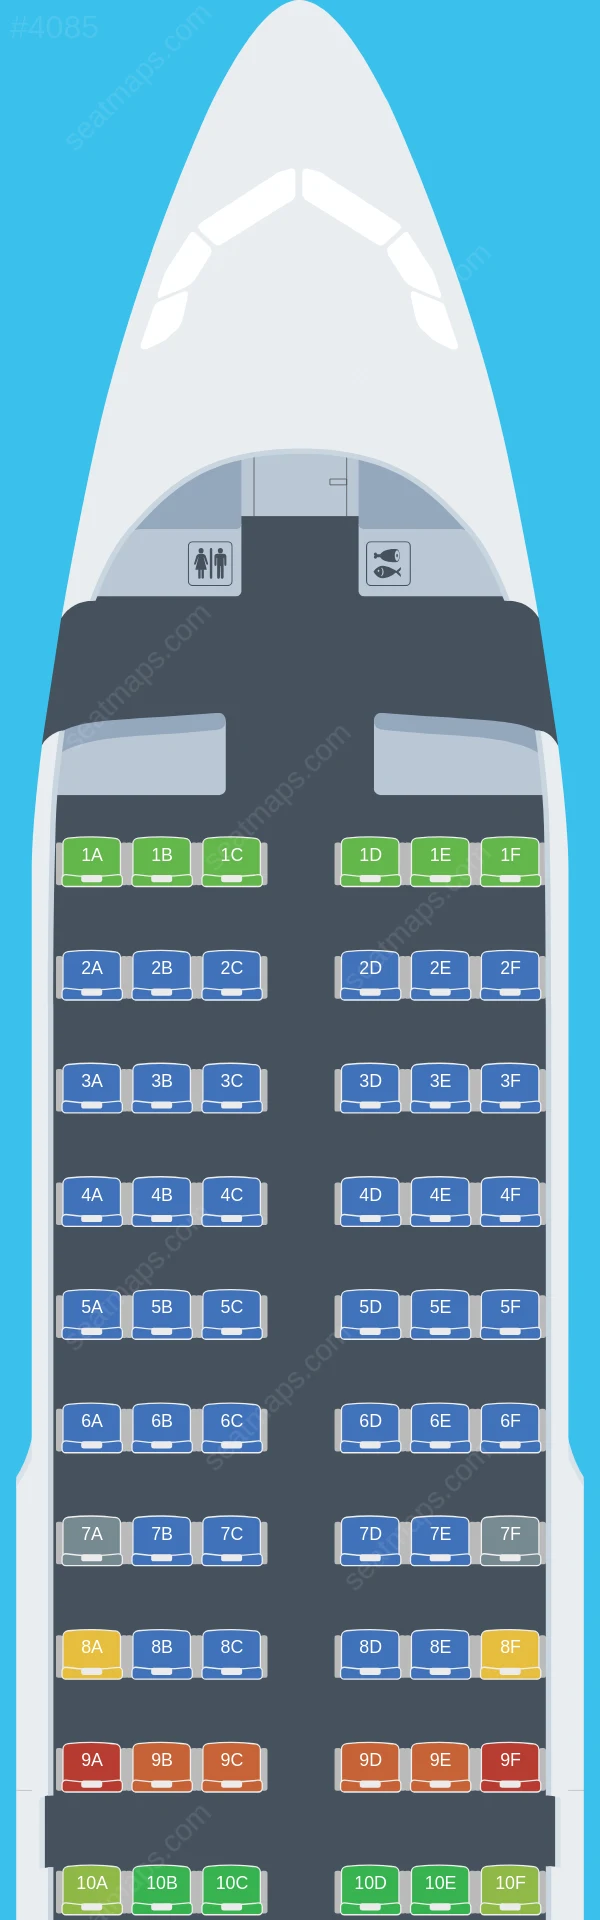 British Airways Airbus A319-100 V.1 seatmap preview